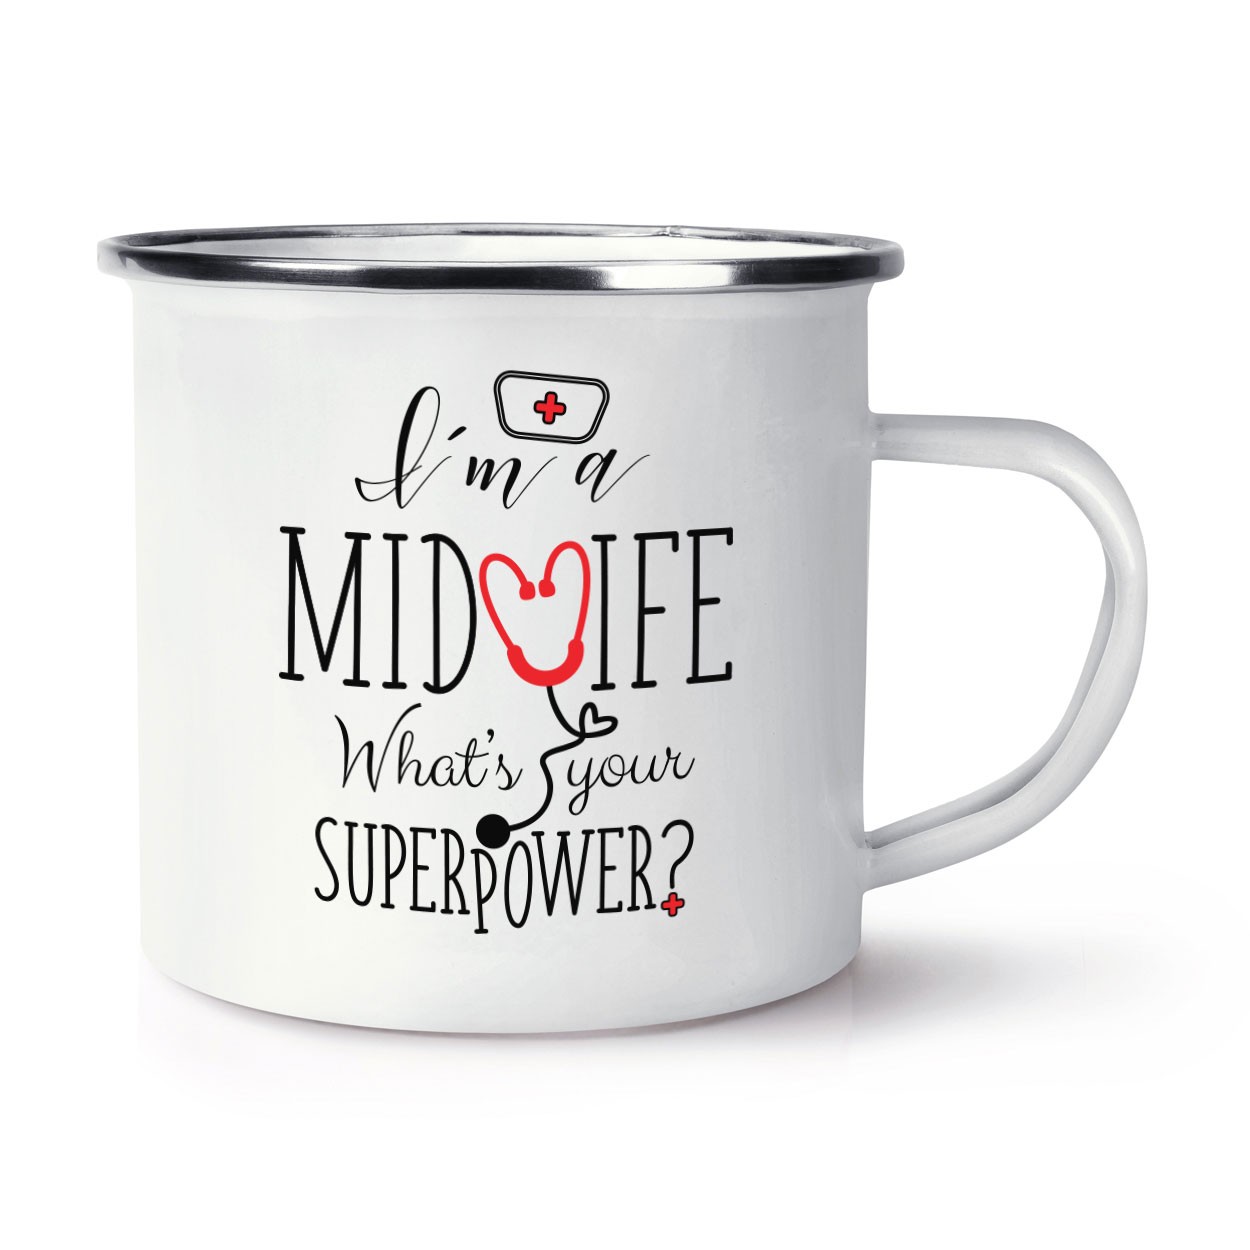 I'm A Midwife What's Your Superpower Retro Enamel Mug Cup